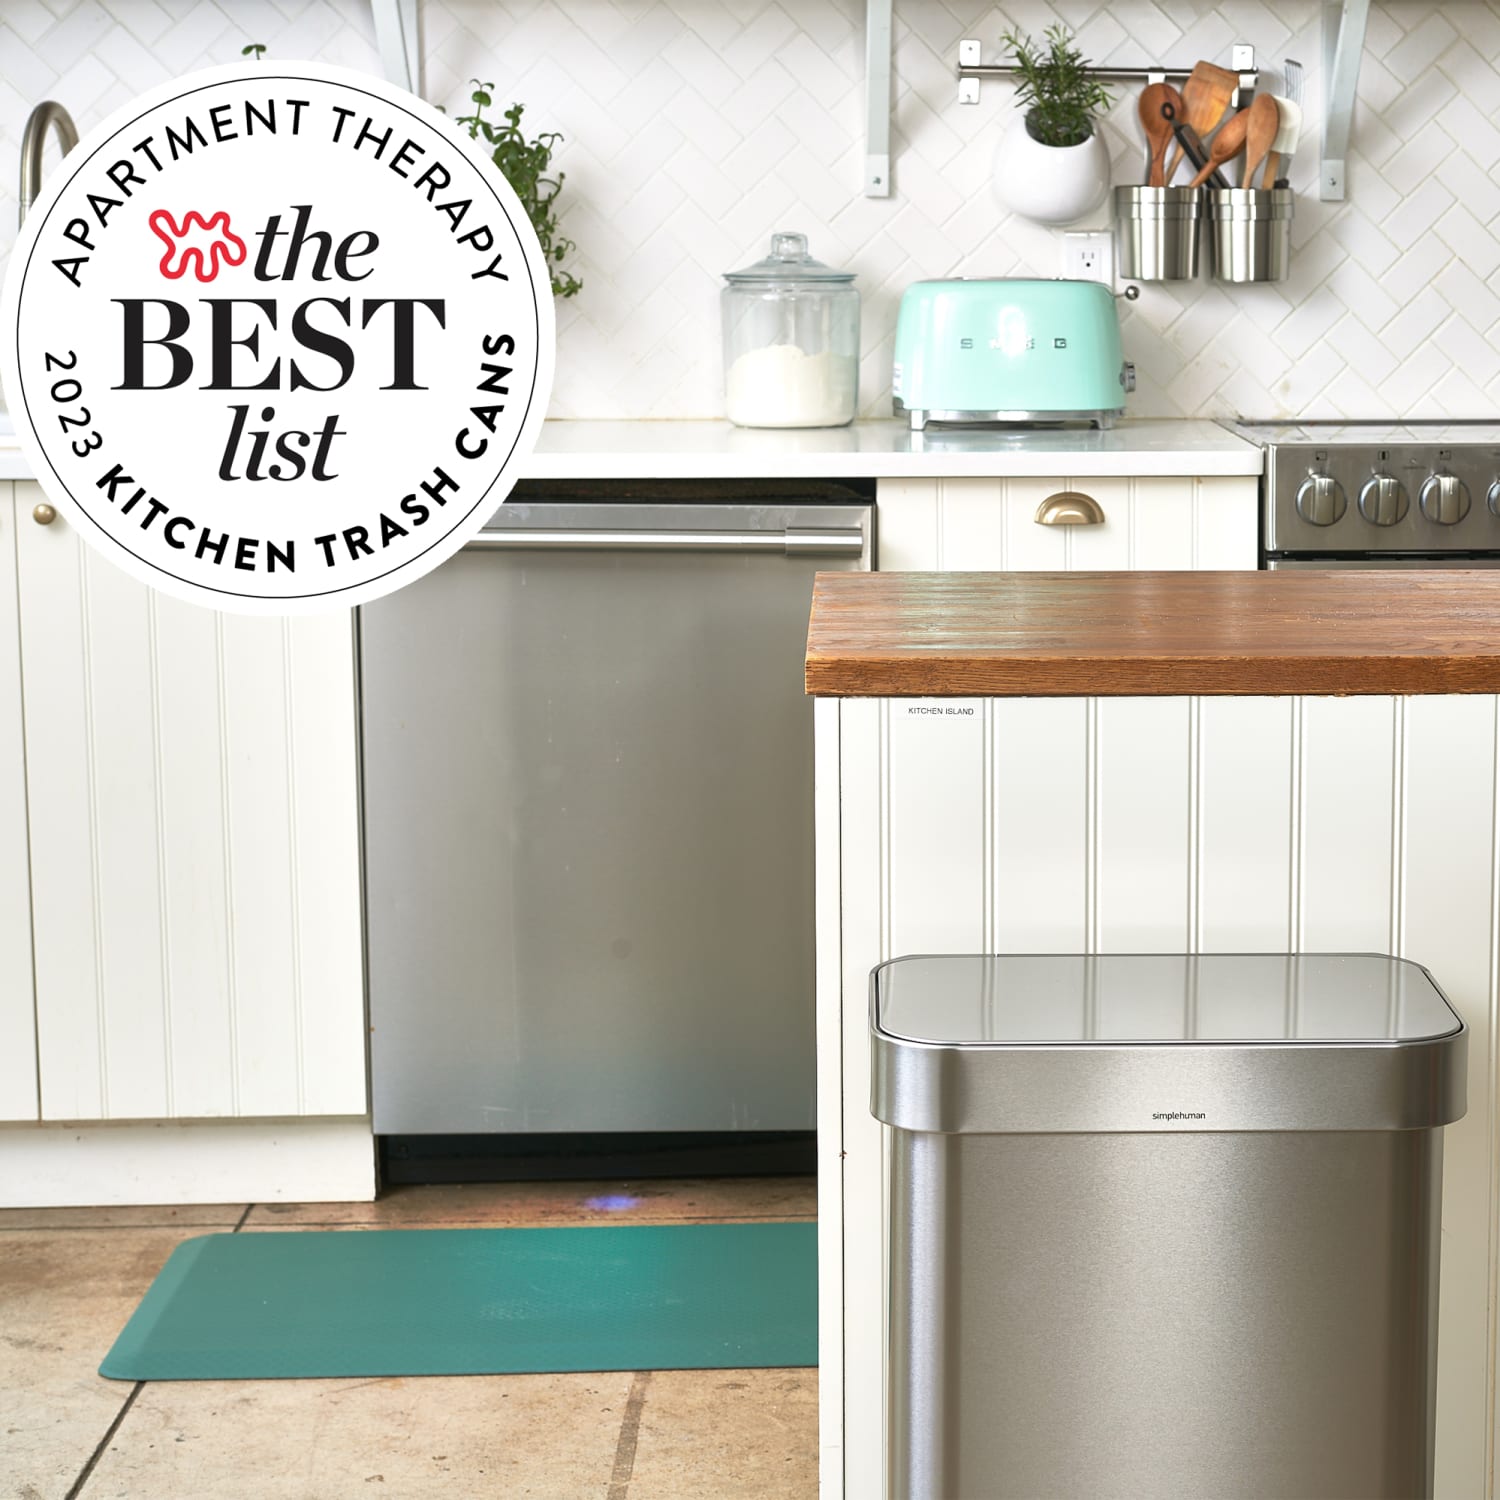 https://cdn.apartmenttherapy.info/image/upload/f_jpg,q_auto:eco,c_fill,g_auto,w_1500,ar_1:1/AT%20Best%20List%2Fbest-list-kitchen-trash-cans